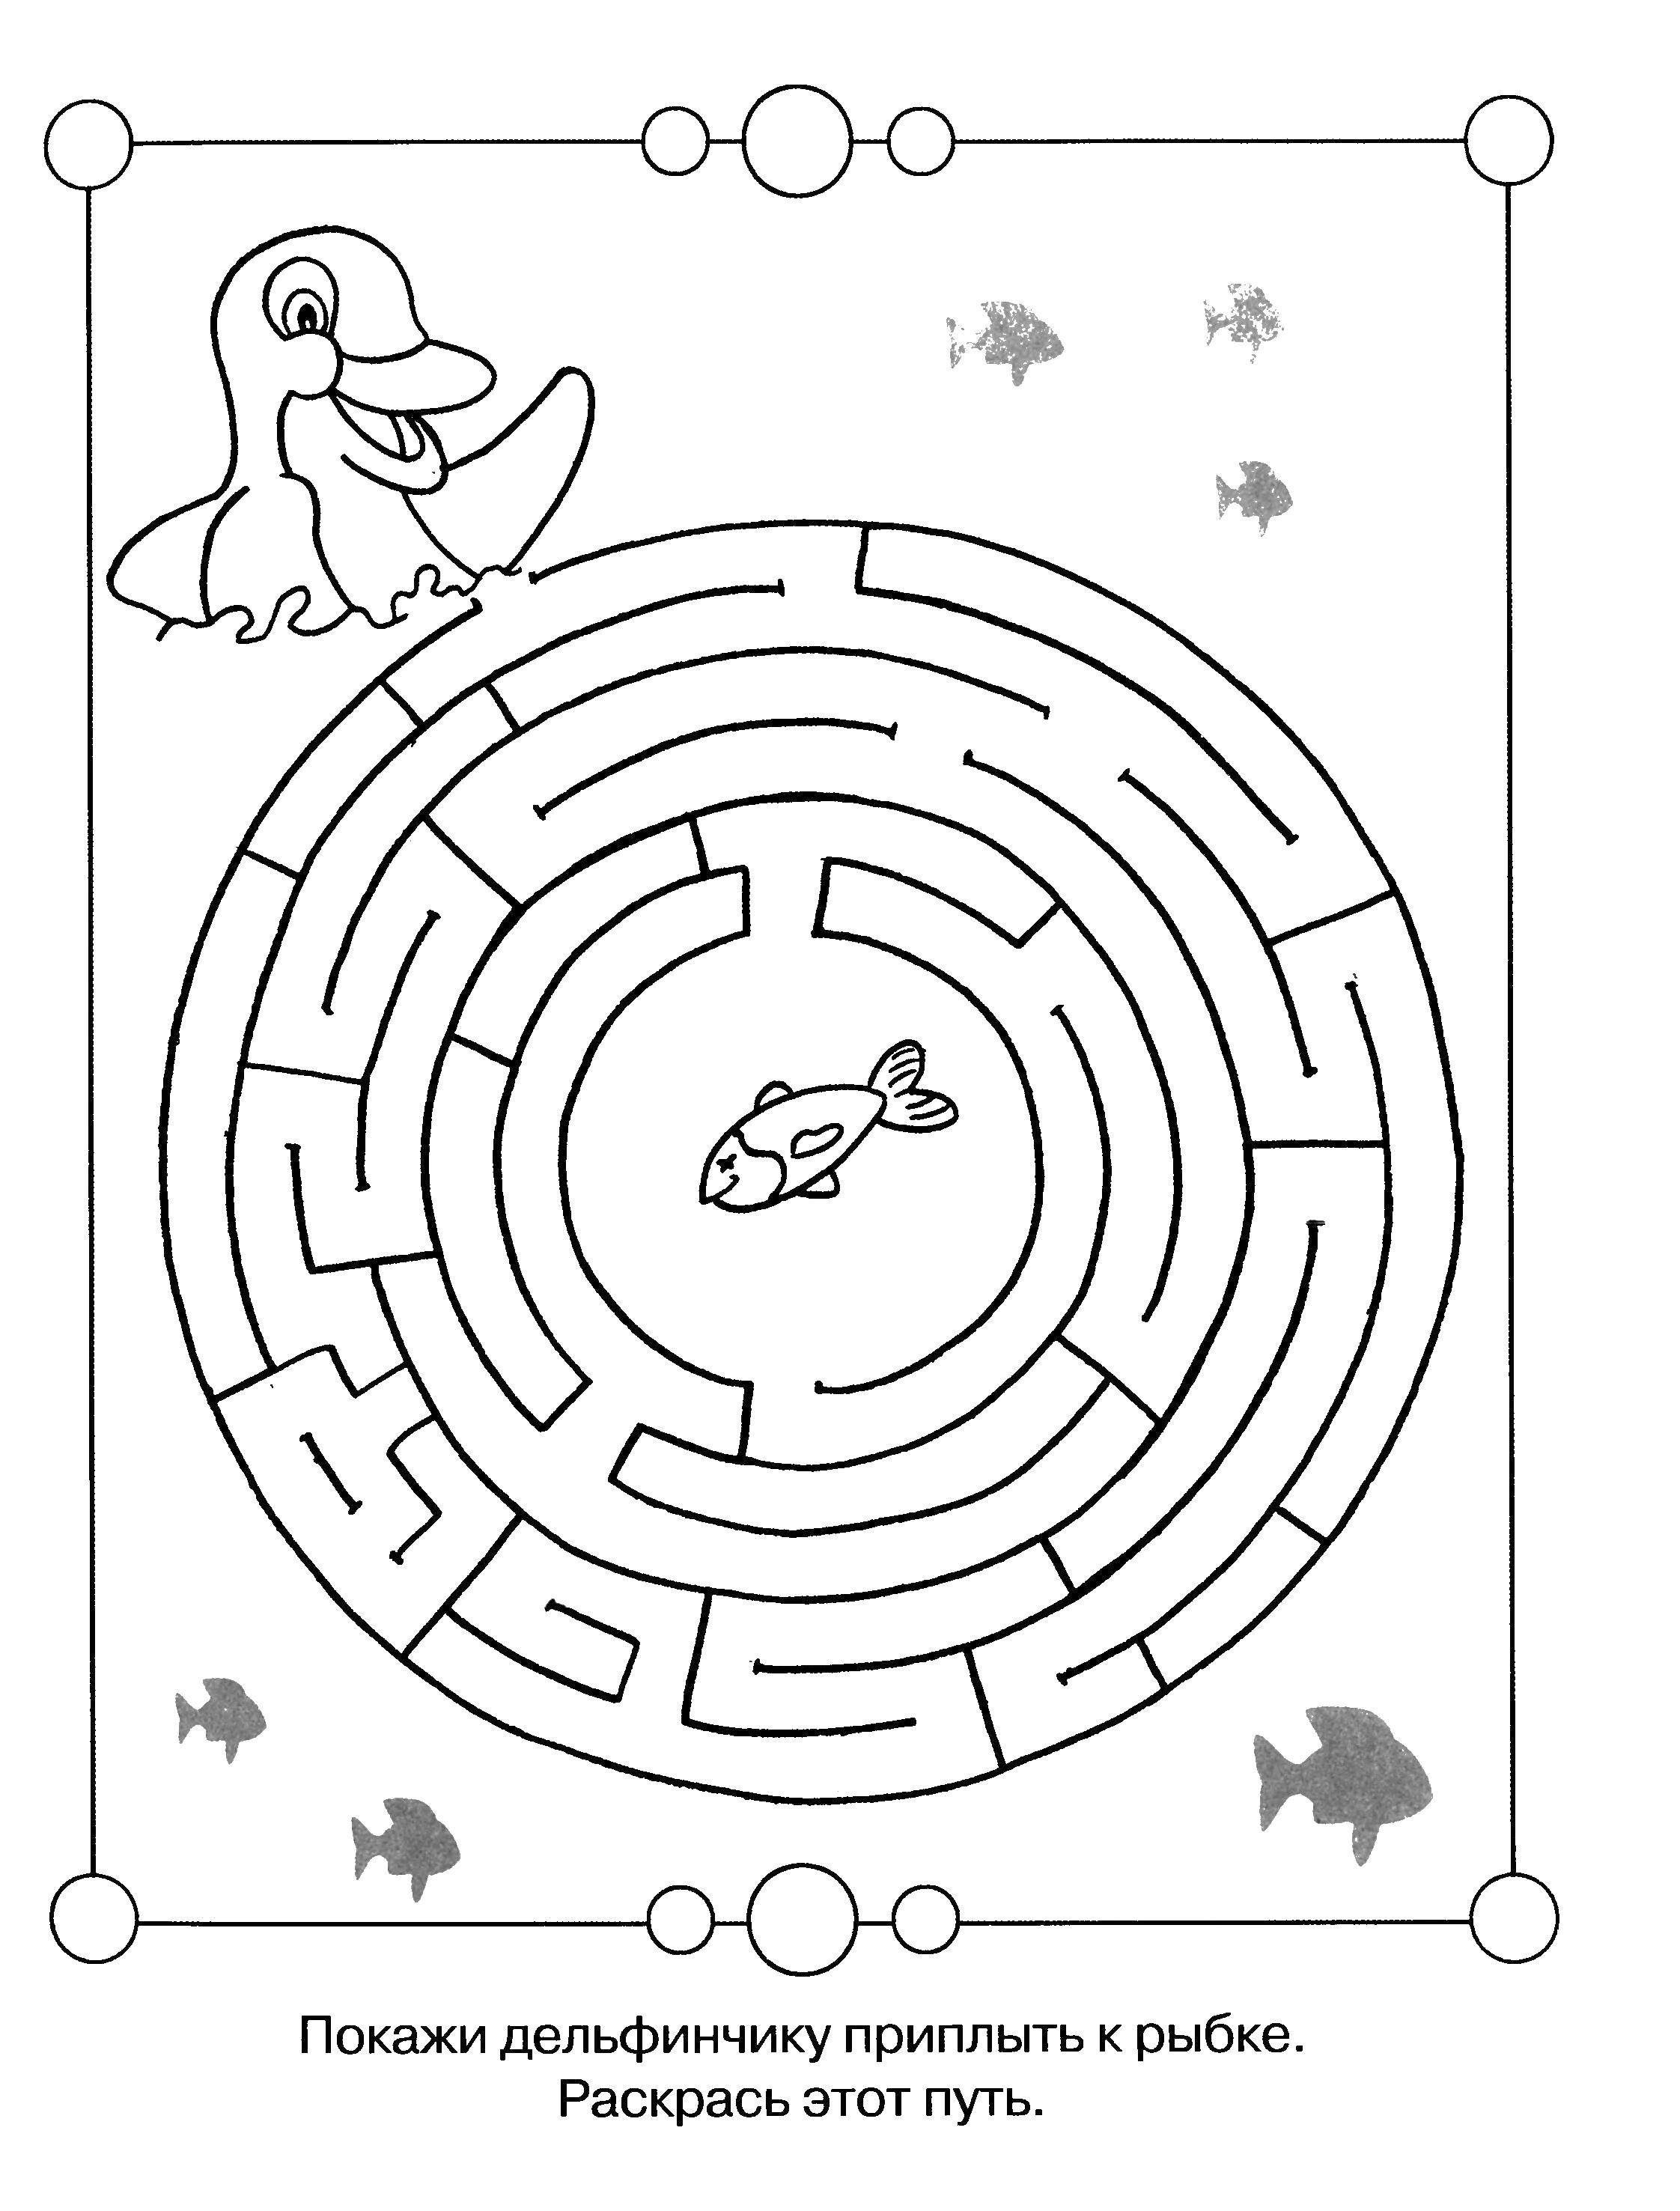 Coloring Bring a Dolphin to the fish. Category riddles for kids. Tags:  Teaching coloring, logic.